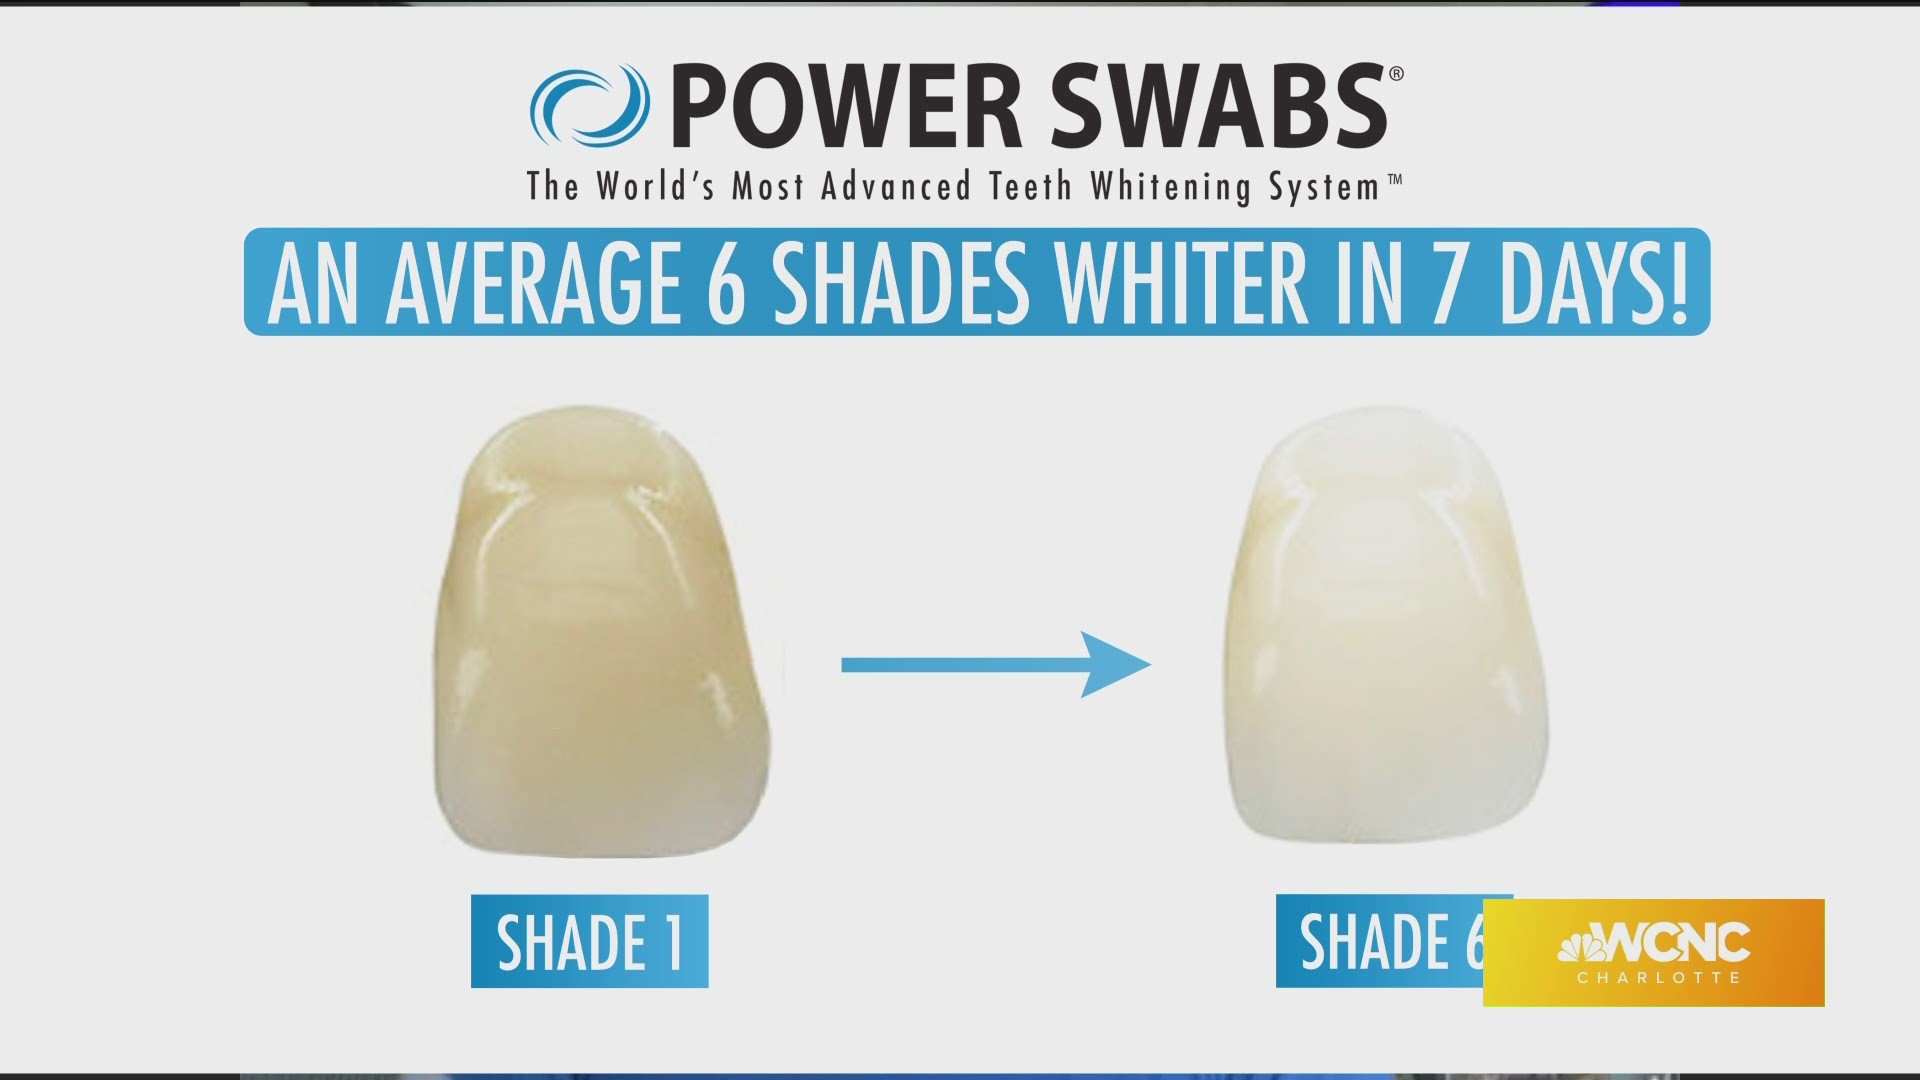 Power Swabs removes stains and brightens teeth in just minutes a day for seven days.